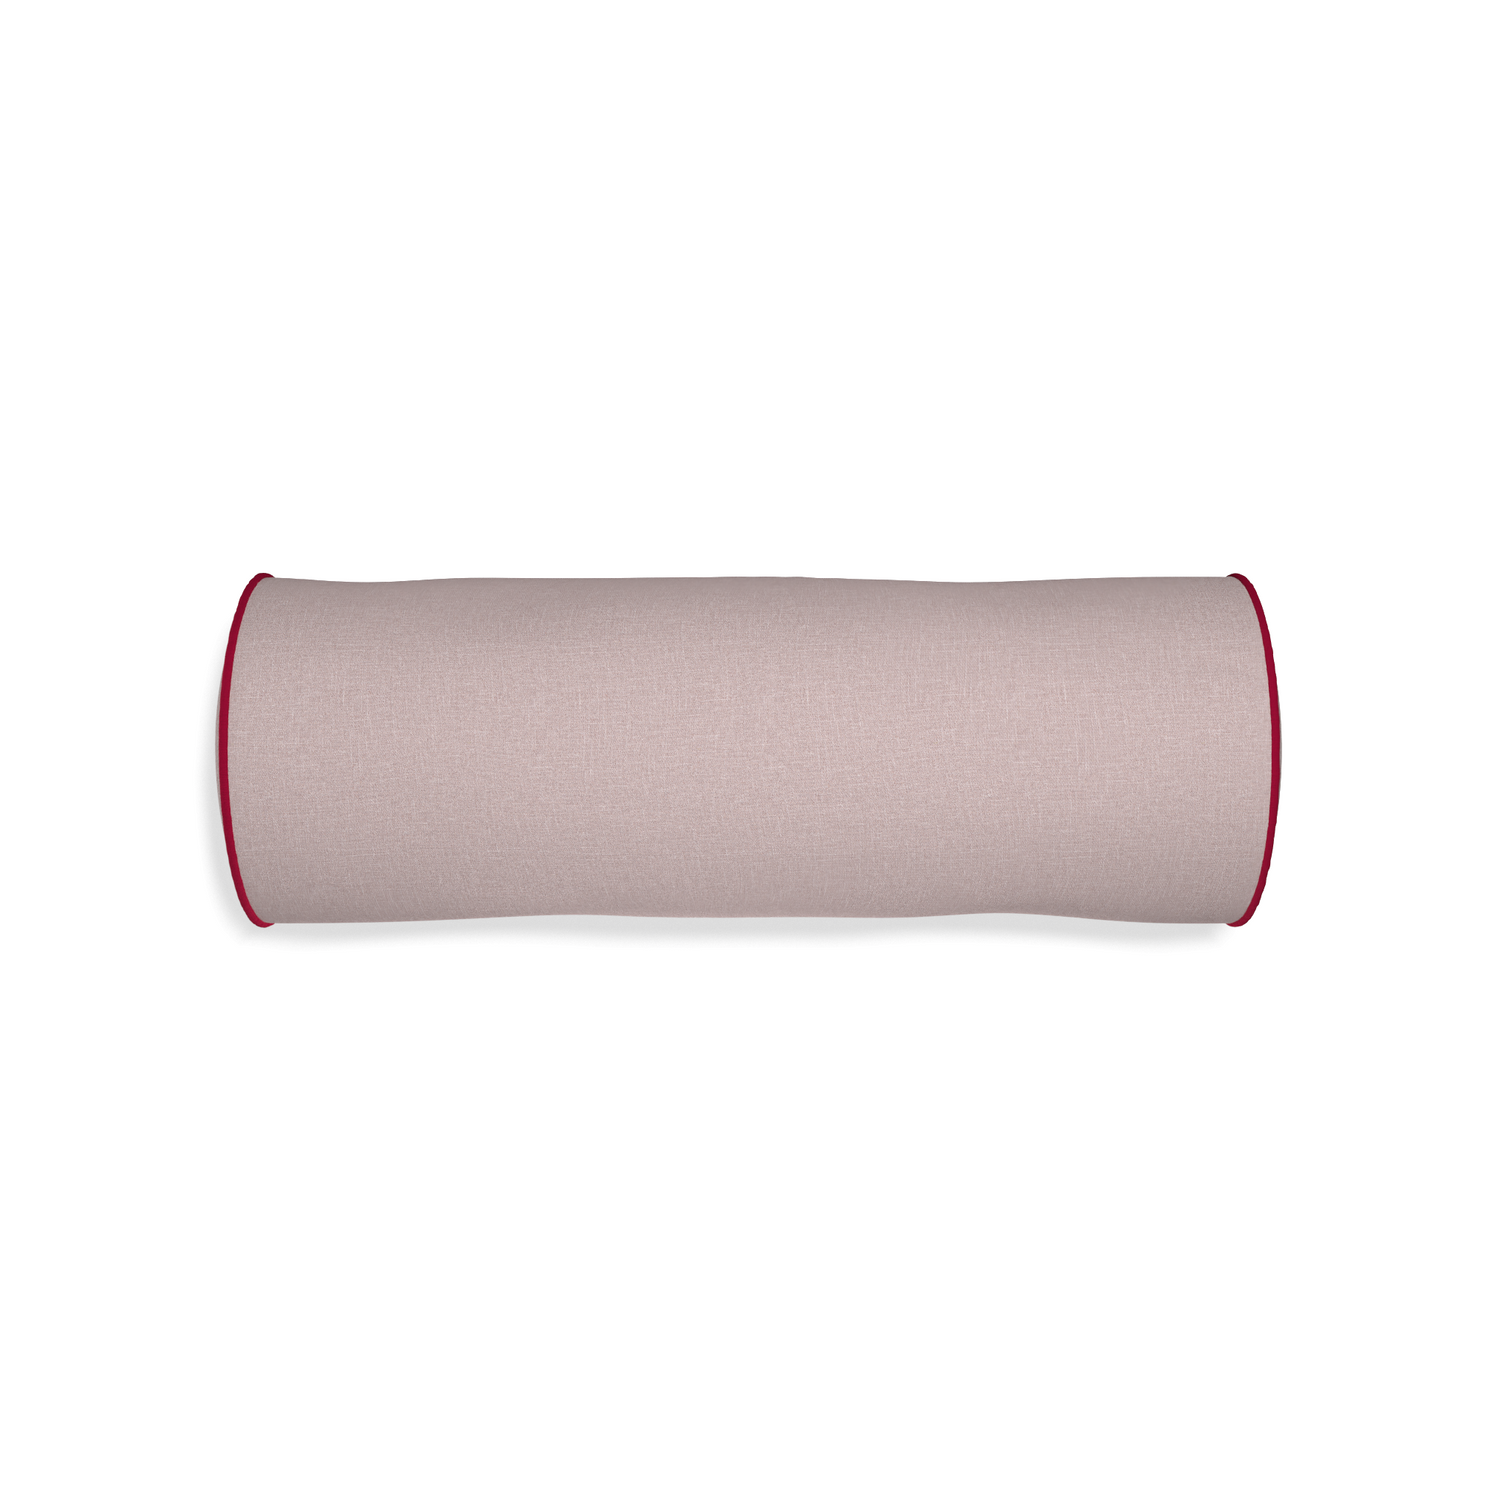 Bolster orchid custom mauve pinkpillow with raspberry piping on white background